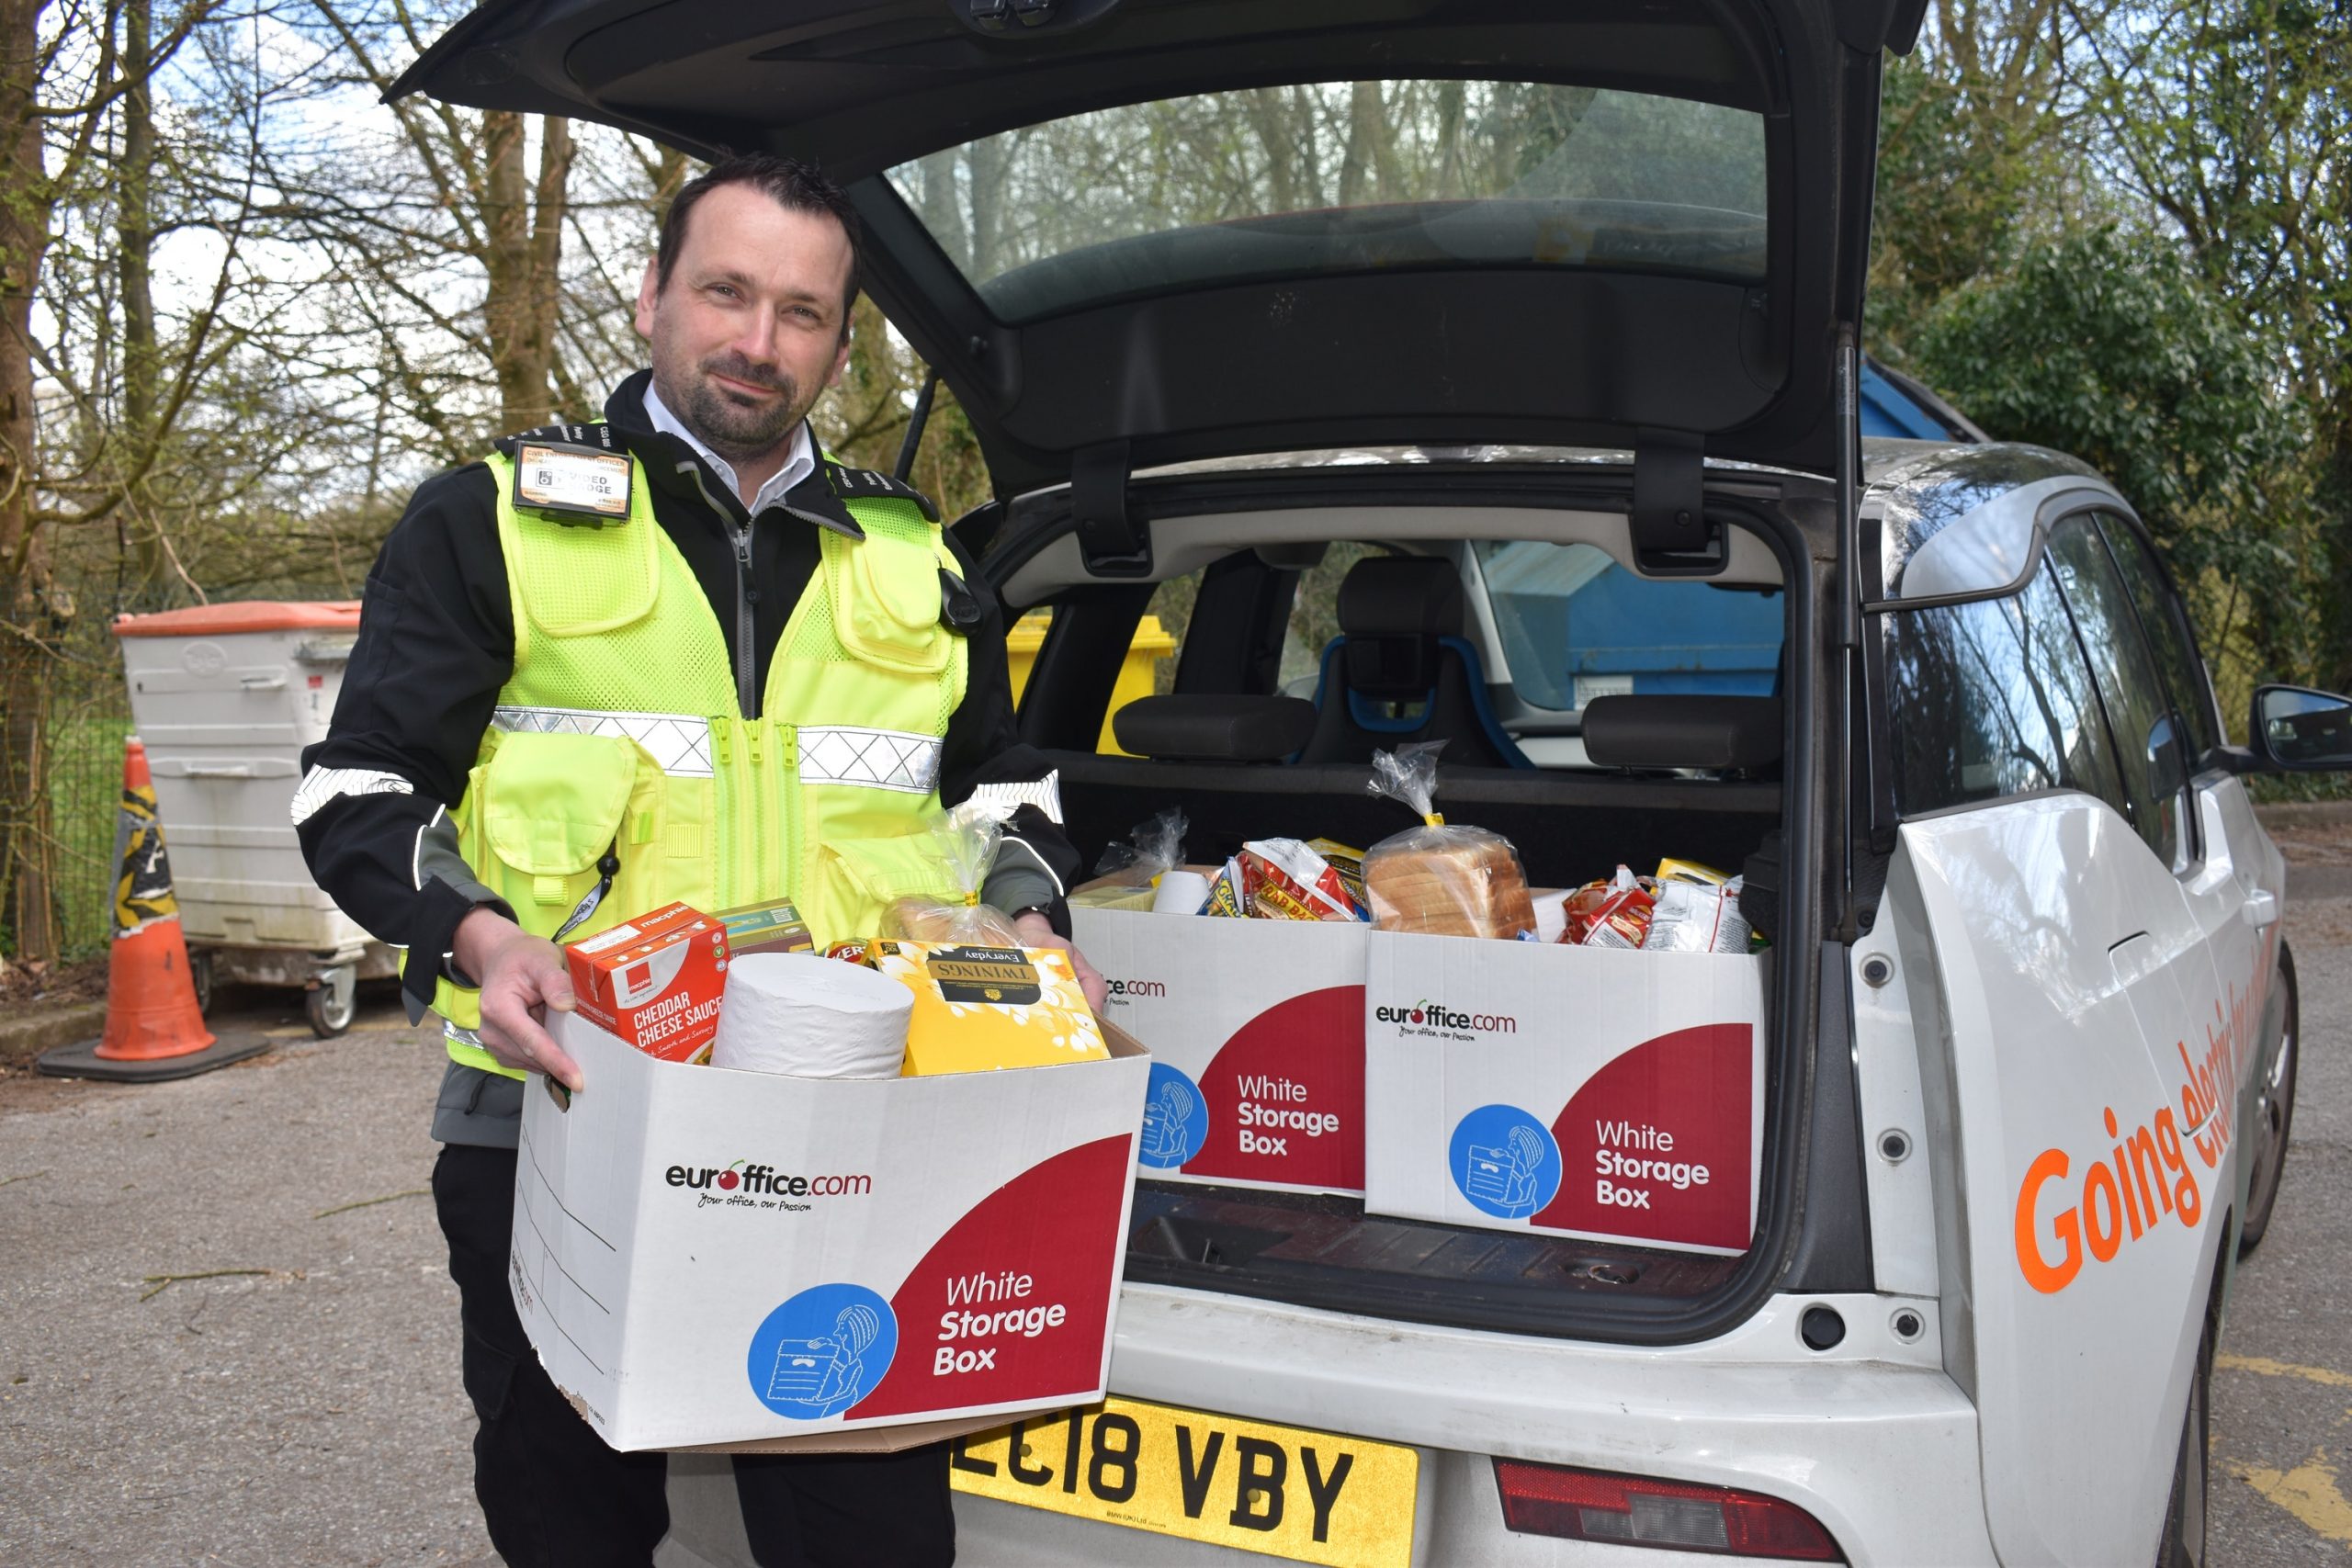 Traffic wardens deliver food boxes instead of fines during pandemic